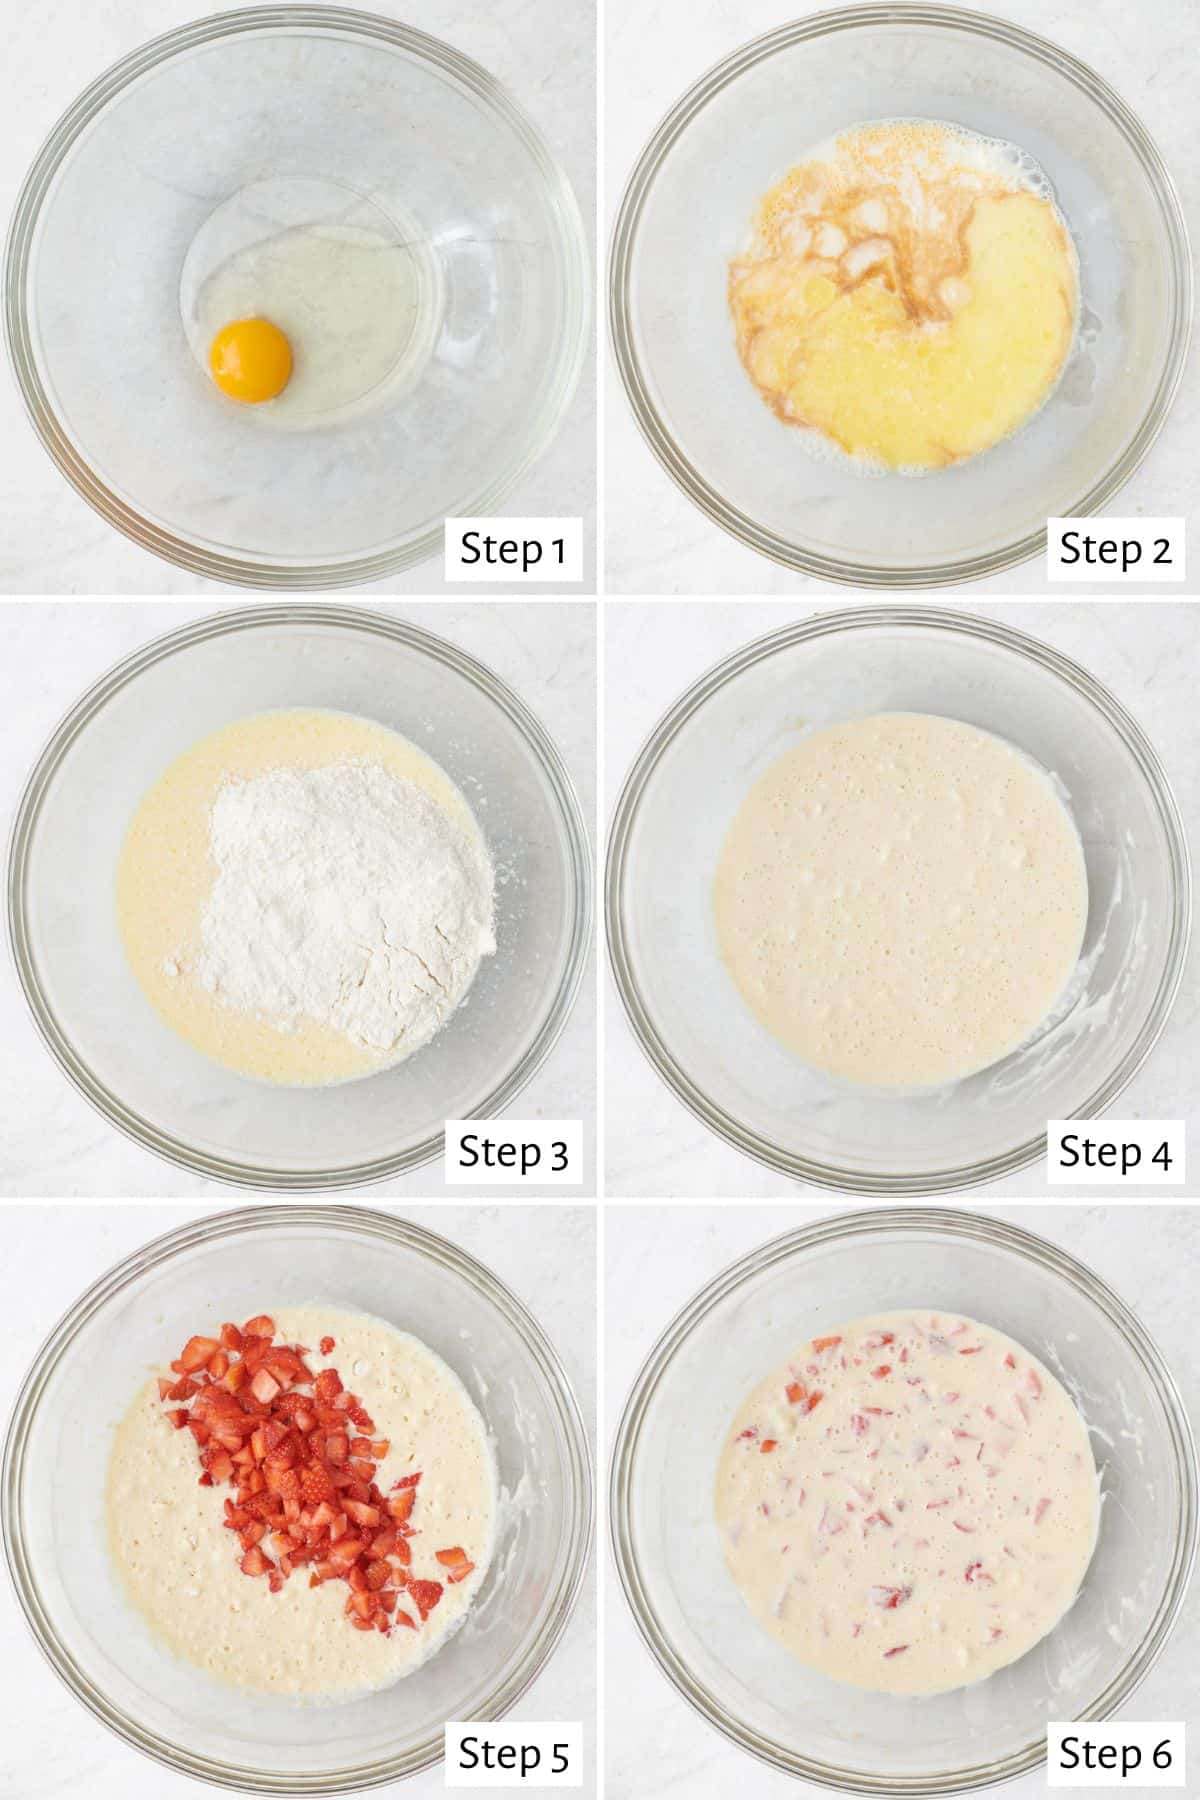 6 image collage making recipe in a large bowl: 1- egg in a bowl, 2- after whisking together with vanilla and milk added, 3- after combining with dry ingredients added, 4- after mixing pancake batter, 5- diced strawberries added, 6- final batter.